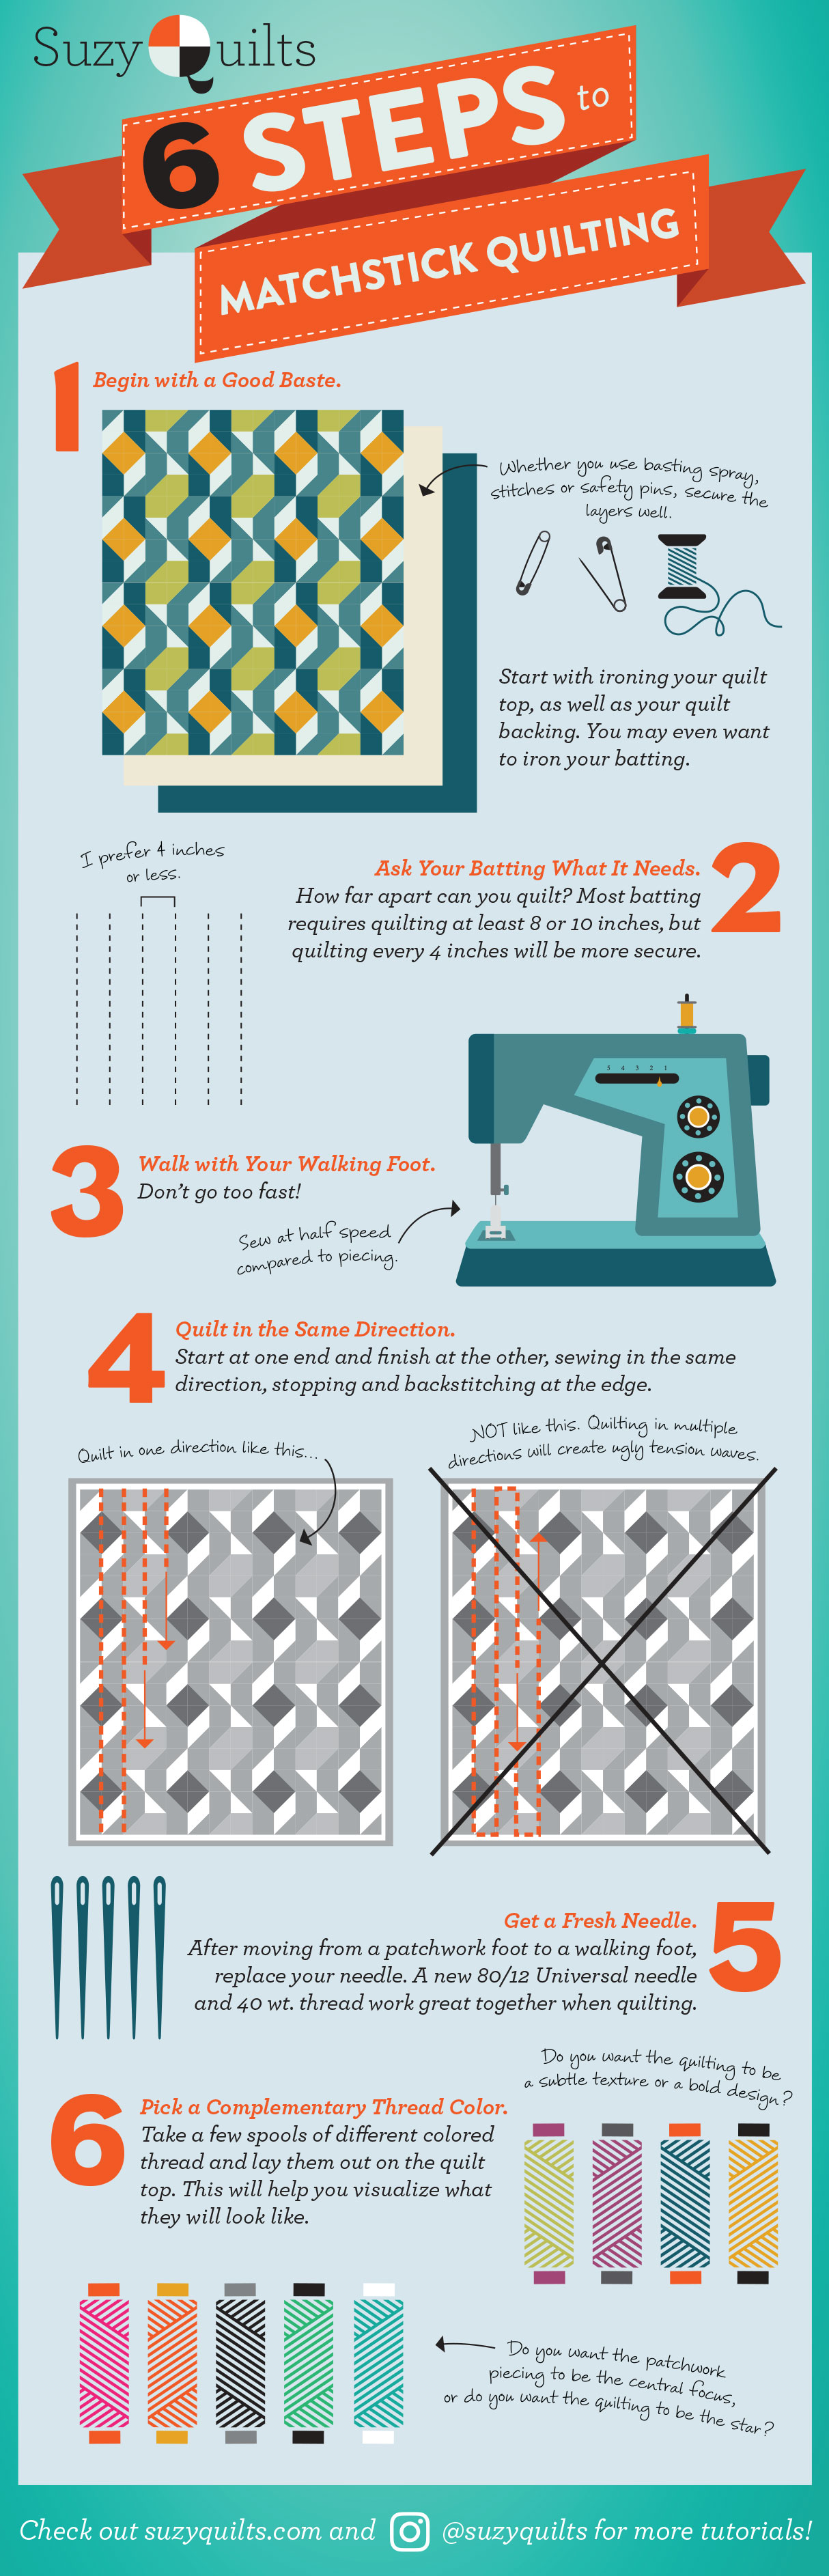 Learn the 6 simple steps to straight line quilting, or as some call it, matchstick quilting. This is a great beginner quilter tutorial! | Suzy Quilts - https://suzyquilts.com/6-tips-for-straight-line-machine-quilting-a-k-a-matchstick-quilting